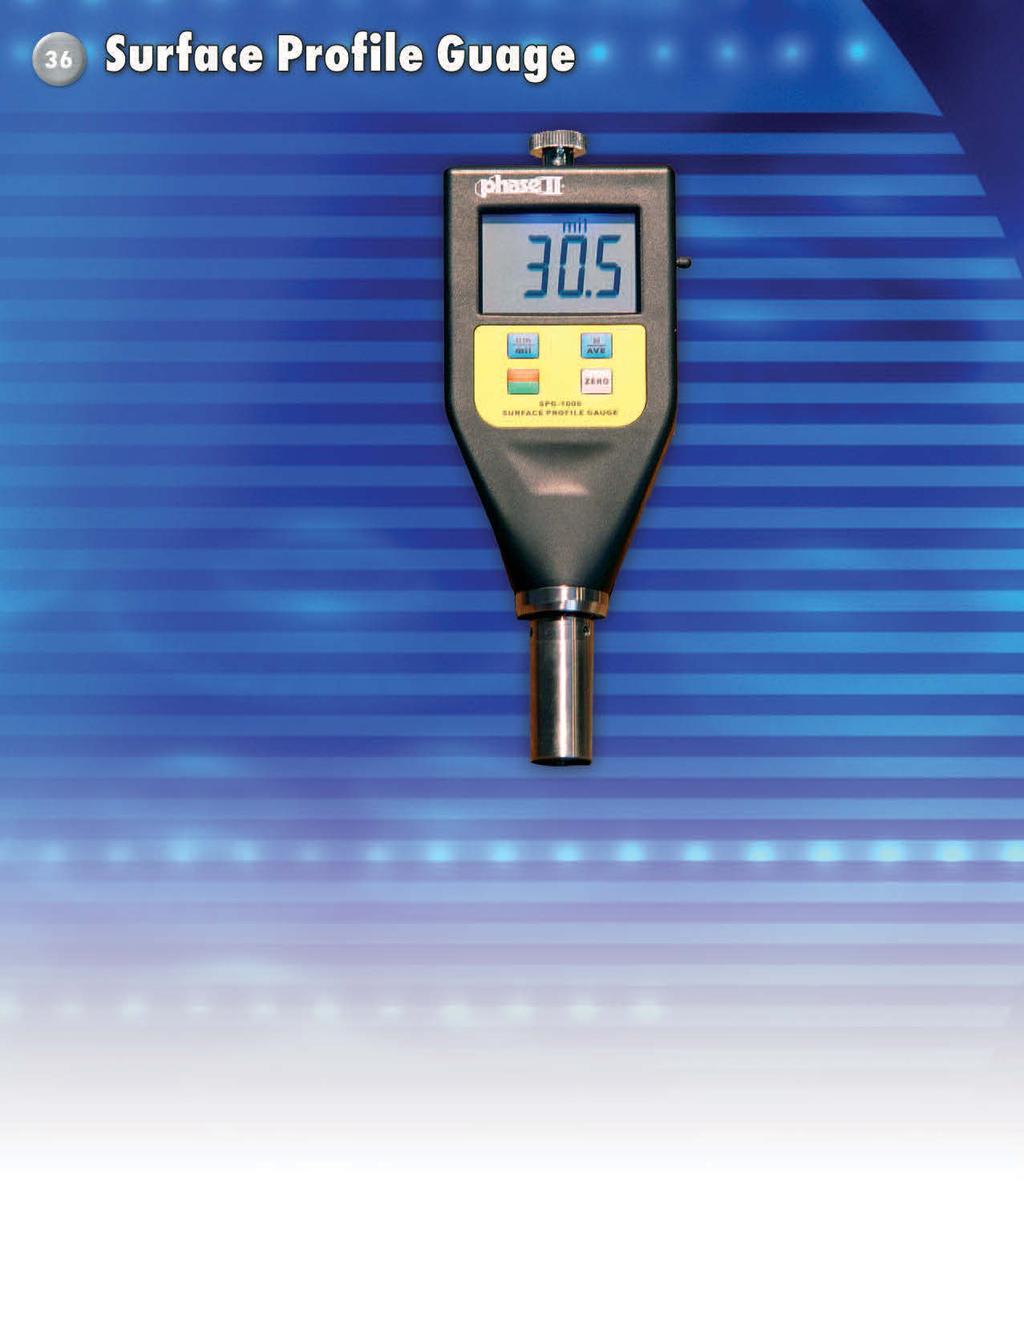 New! 5 Year Display 4-digit LCD Measuring Range 0-800µm (0-30mils) Accuracy +/-5% or 5 µm (Whichever is greater) Resolution 1 µm (0.